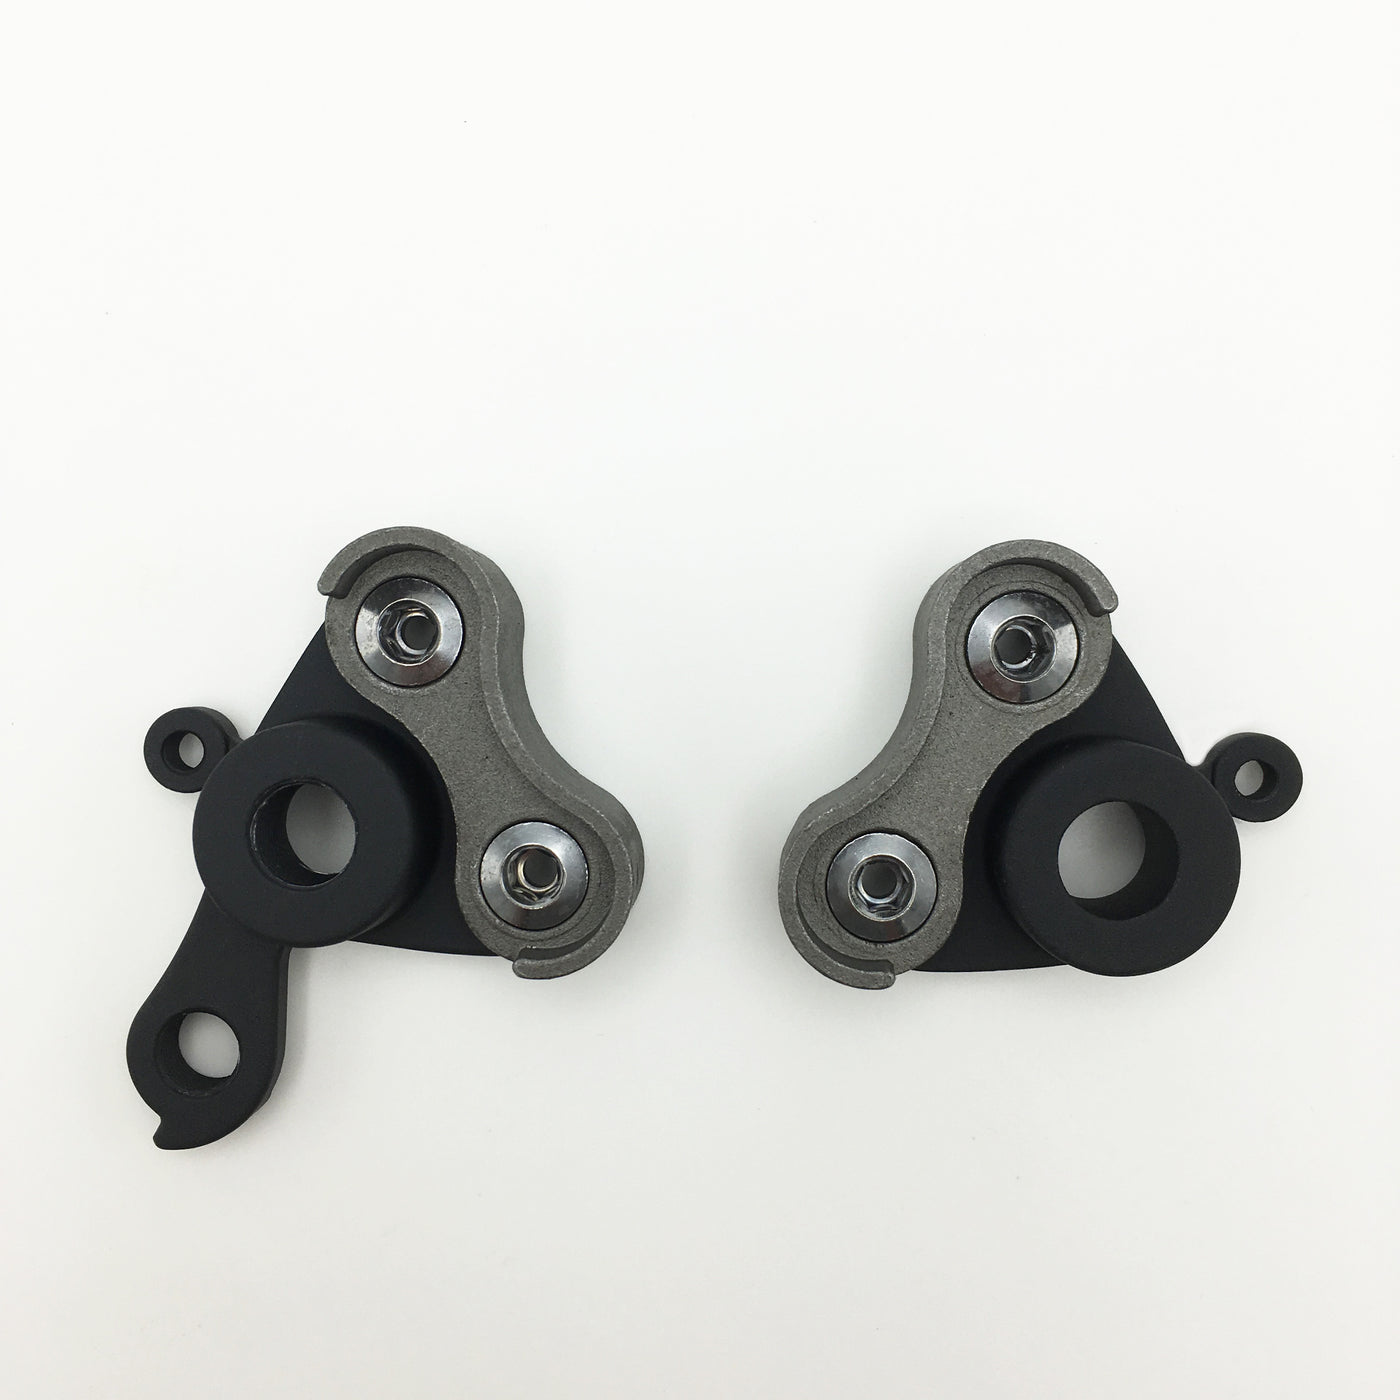 Complete thru-axle modular dropout set - with eyelets - 142/12 - 1.0 thread pitch